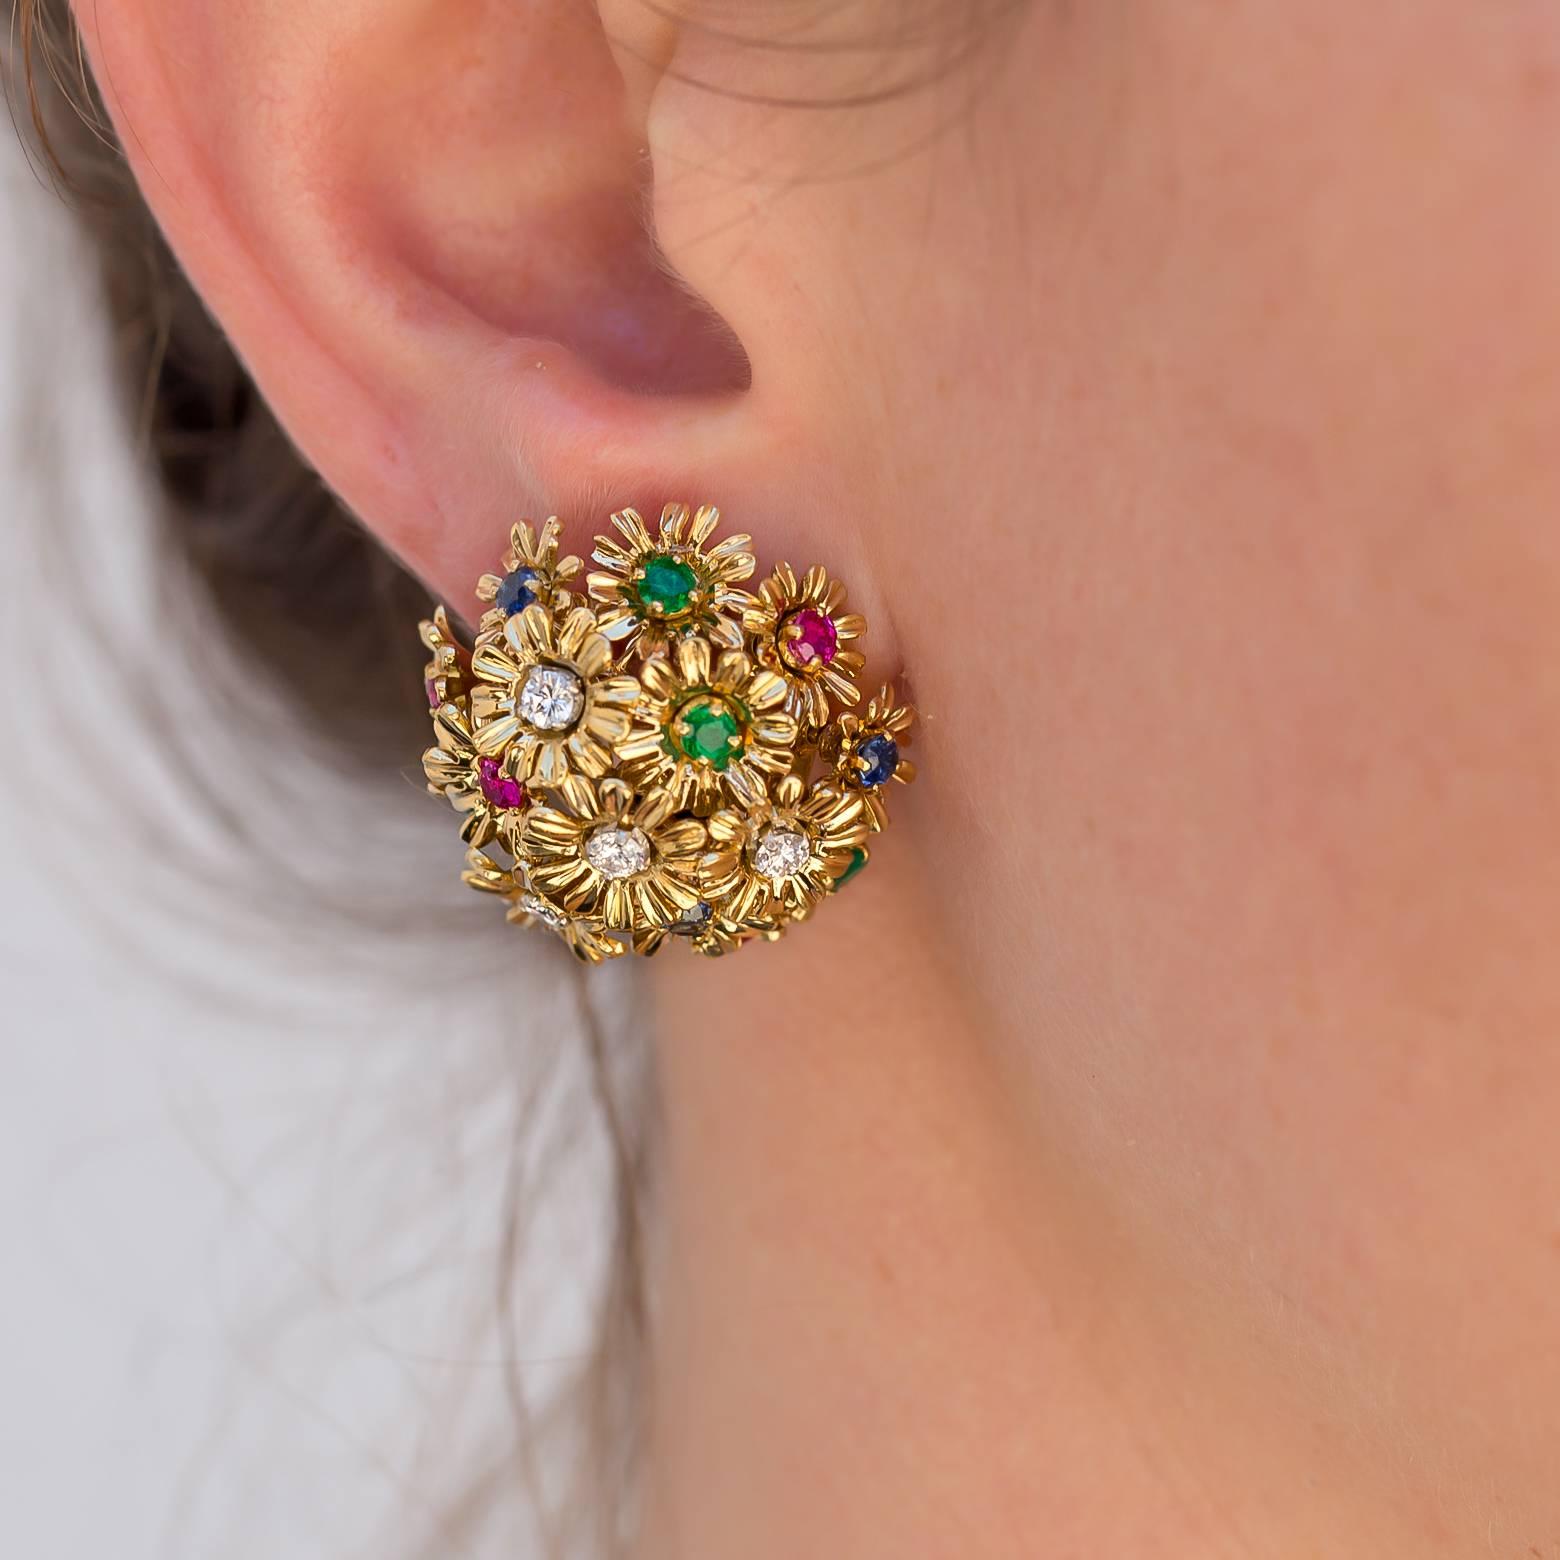 Modern Tremblant Yellow Gold Earrings Flower with Diamonds Rubies Emeralds Sapphire